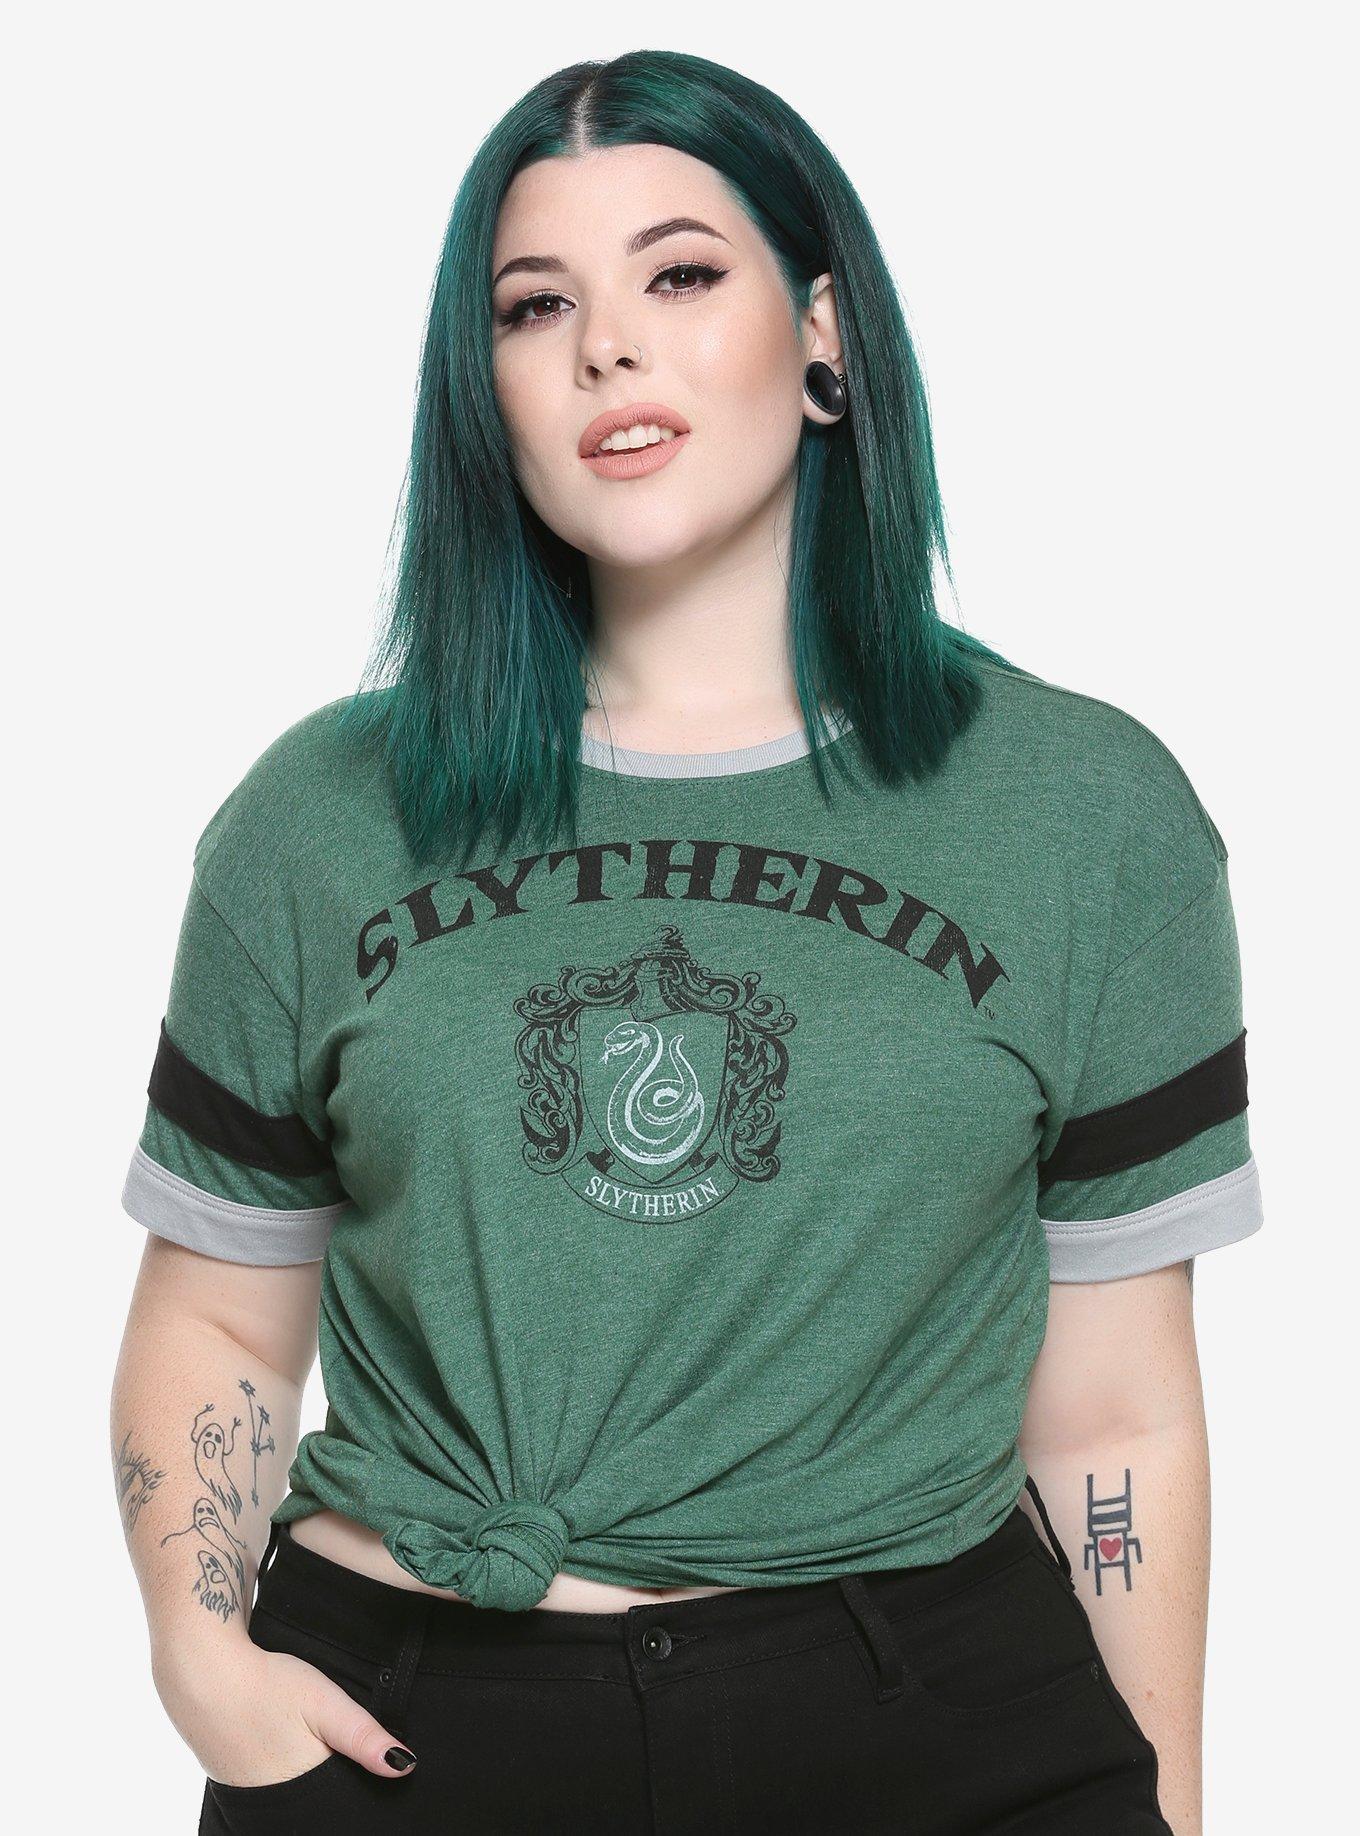 Harry Potter Slytherin Girls Athletic T-Shirt Plus Size, GREEN, hi-res